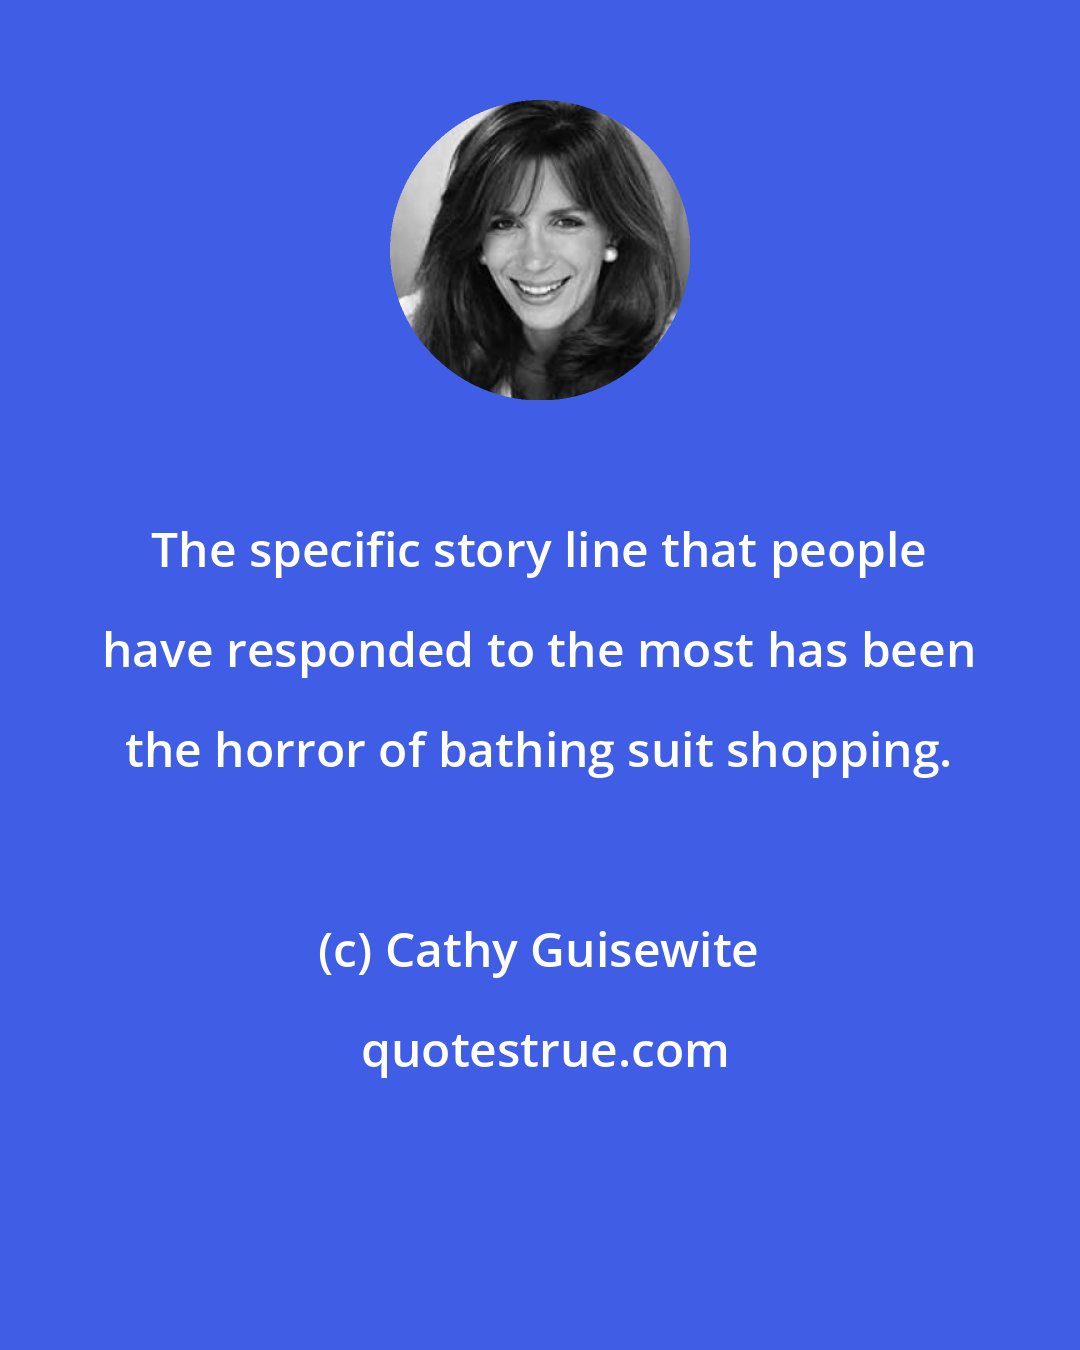 Cathy Guisewite: The specific story line that people have responded to the most has been the horror of bathing suit shopping.